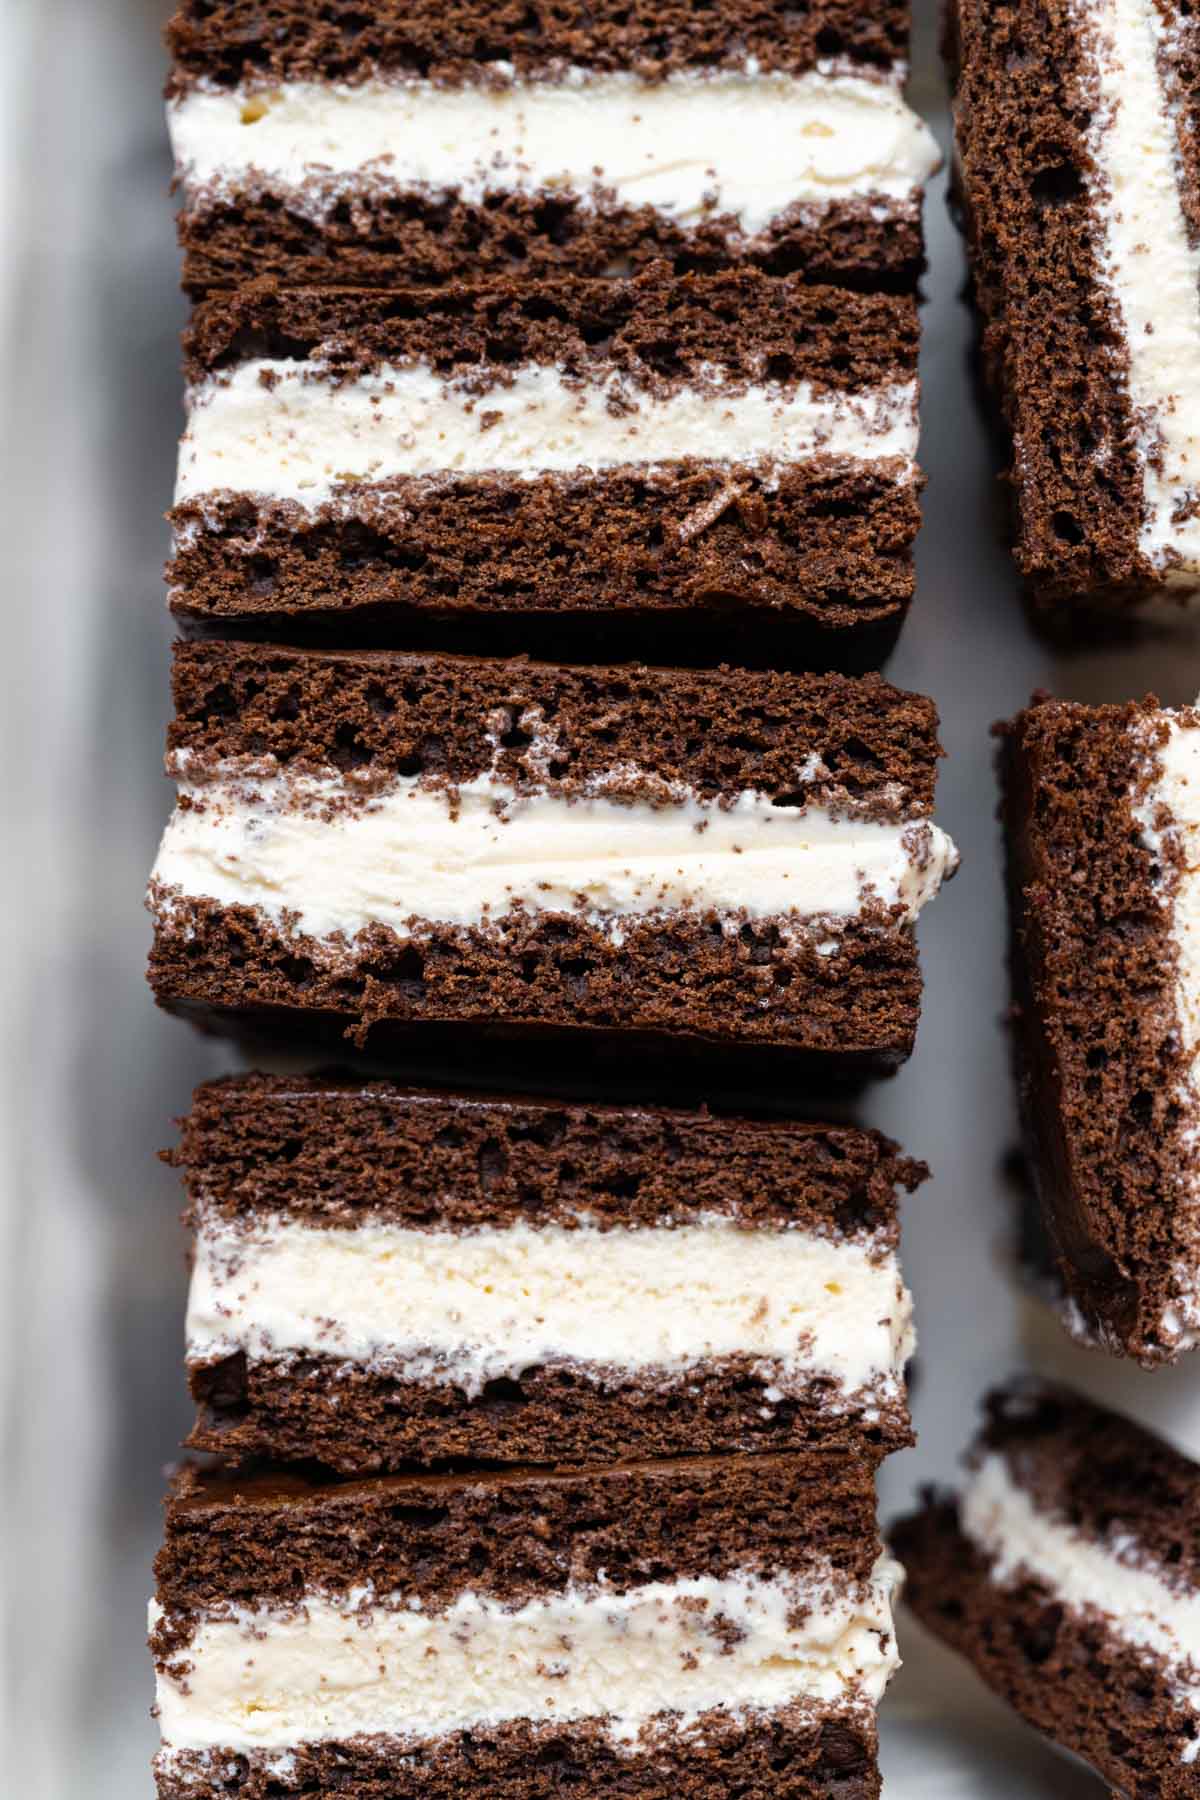 Ice Cream Sandwiches sliced for serving